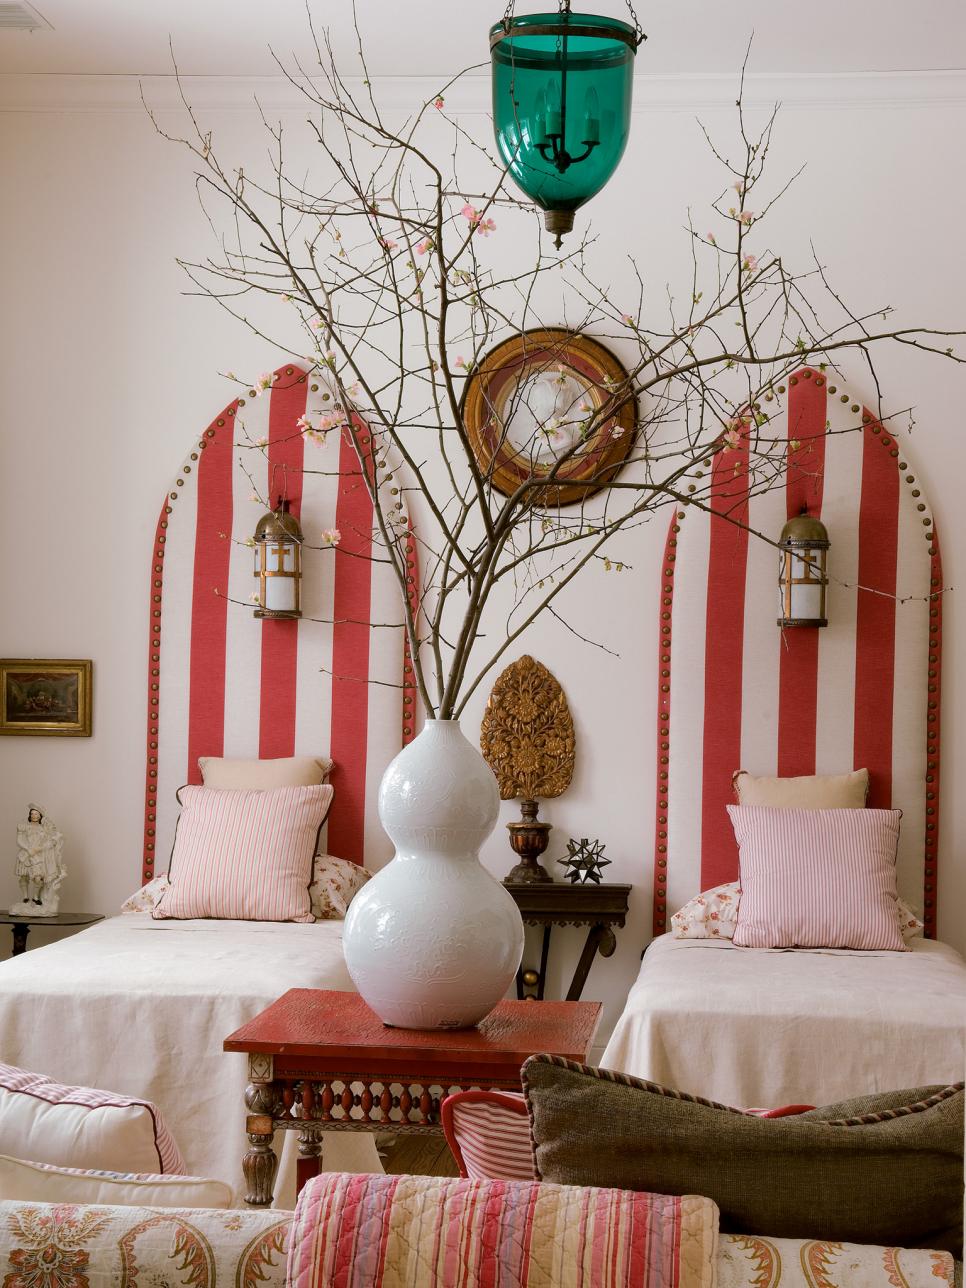 bedroom beds twin hgtv farrow ball striped addeo edward branches gibbs coleman brian smith photographer credit